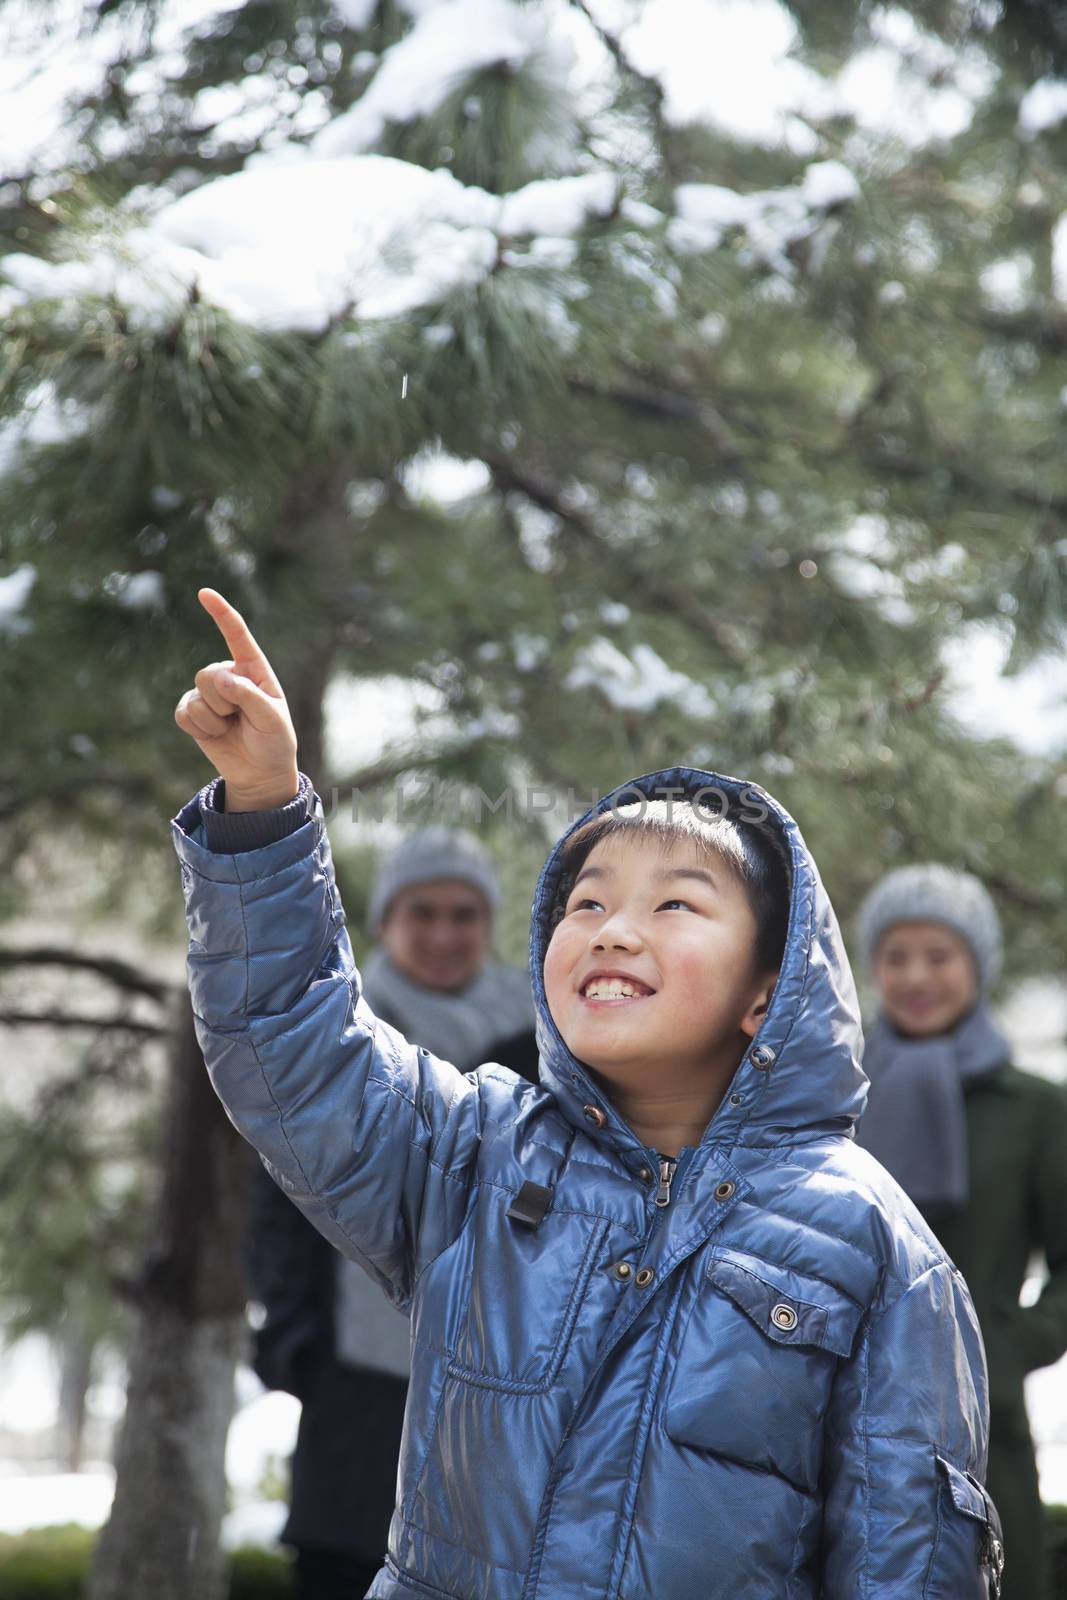 Boy pointing up with parents on the background